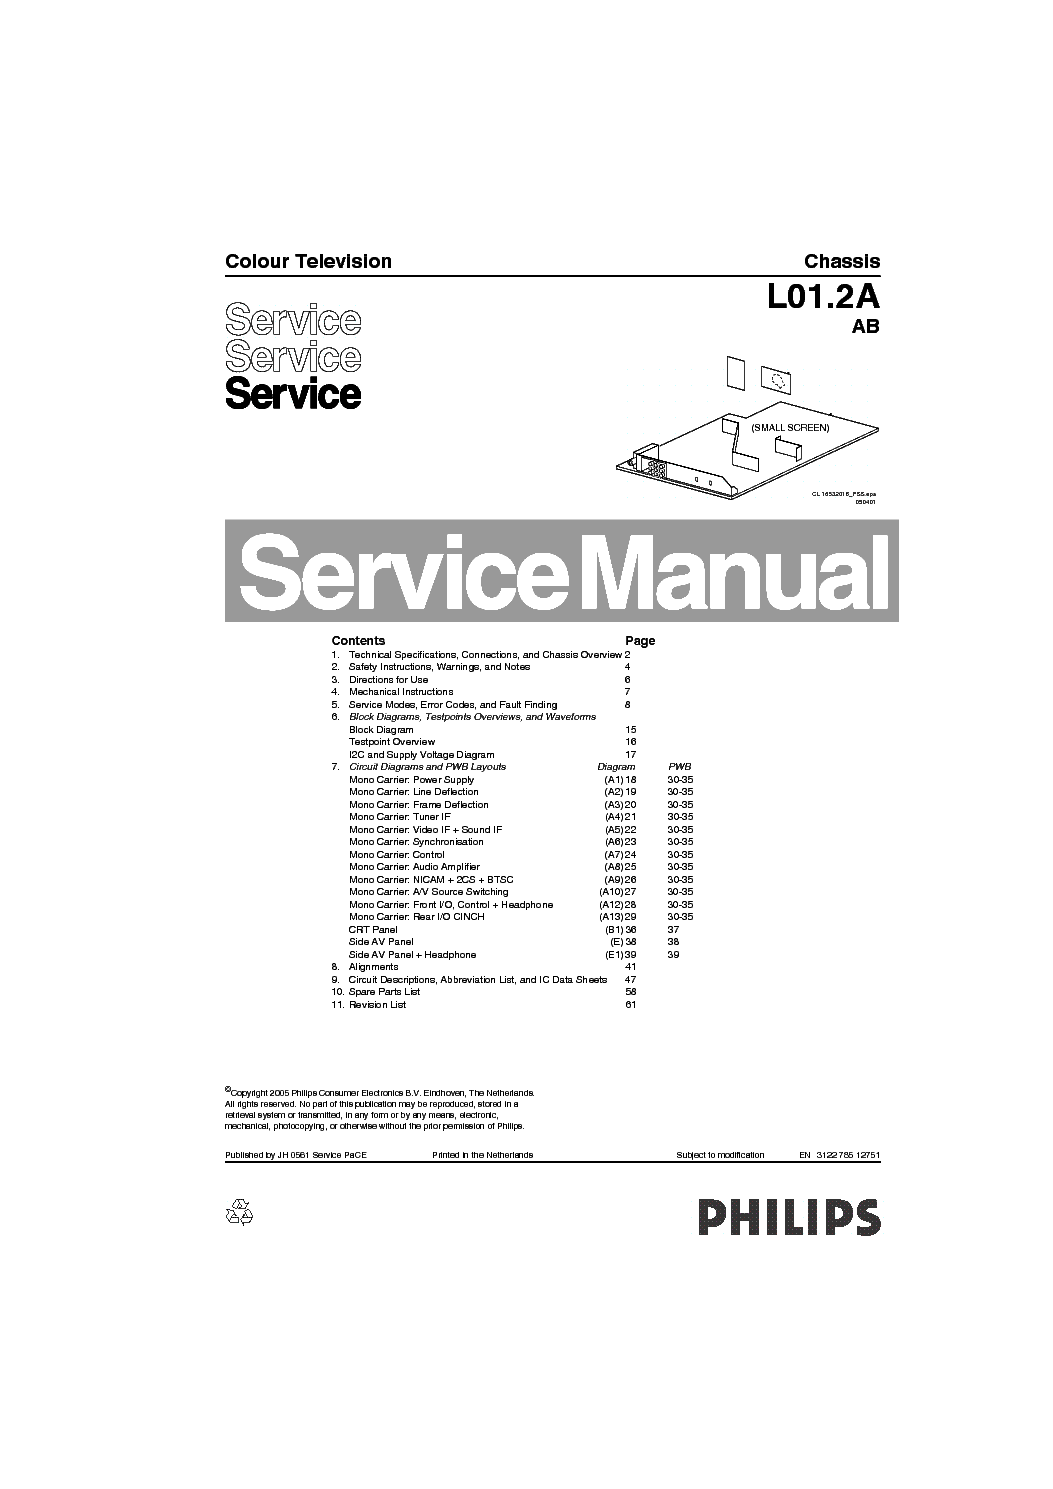 PHILIPS CHASSIS L01.2A-AB service manual (1st page)